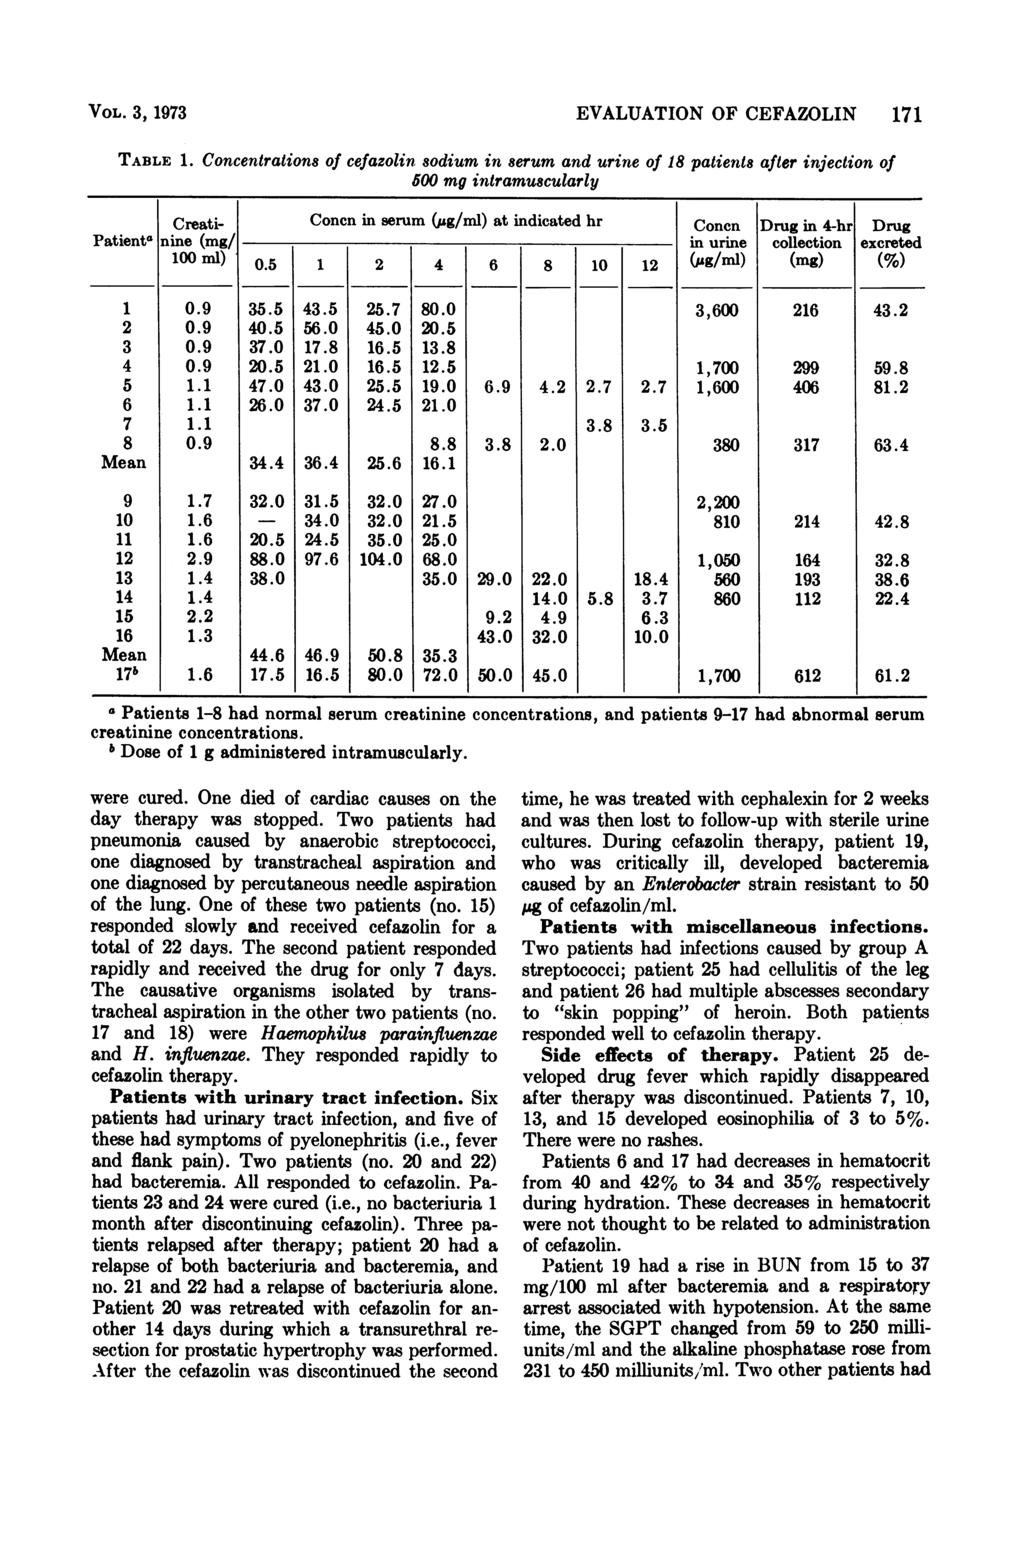 VOL. 3, 1973 EVALUATION OF CEFAZOLIN 171 TABLE 1. Patienta Creatinine (mg/ 1 ml) Concentrations of cefazolin sodium in serum and urine of 18 patients after injection of 5 mg intramuscularly.